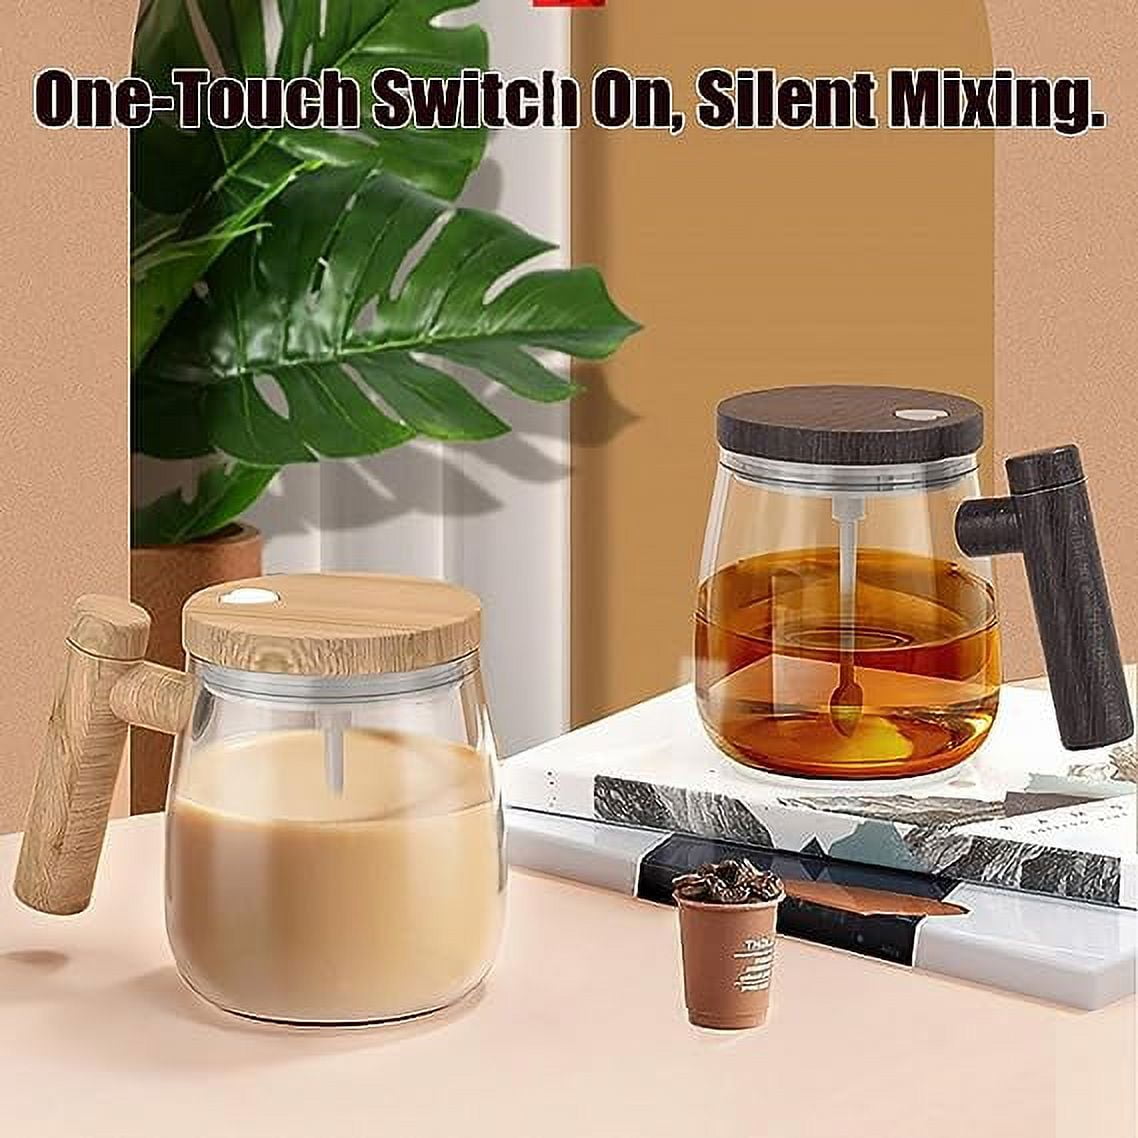  Self Stirring Magnetic Mug, Electric High Speed Mixing Cup,  Electric Self Mixing Mug, Full Automatic Mixing Cup Electric Portable  Blender Kitchen Gadgets (Champagne): Home & Kitchen